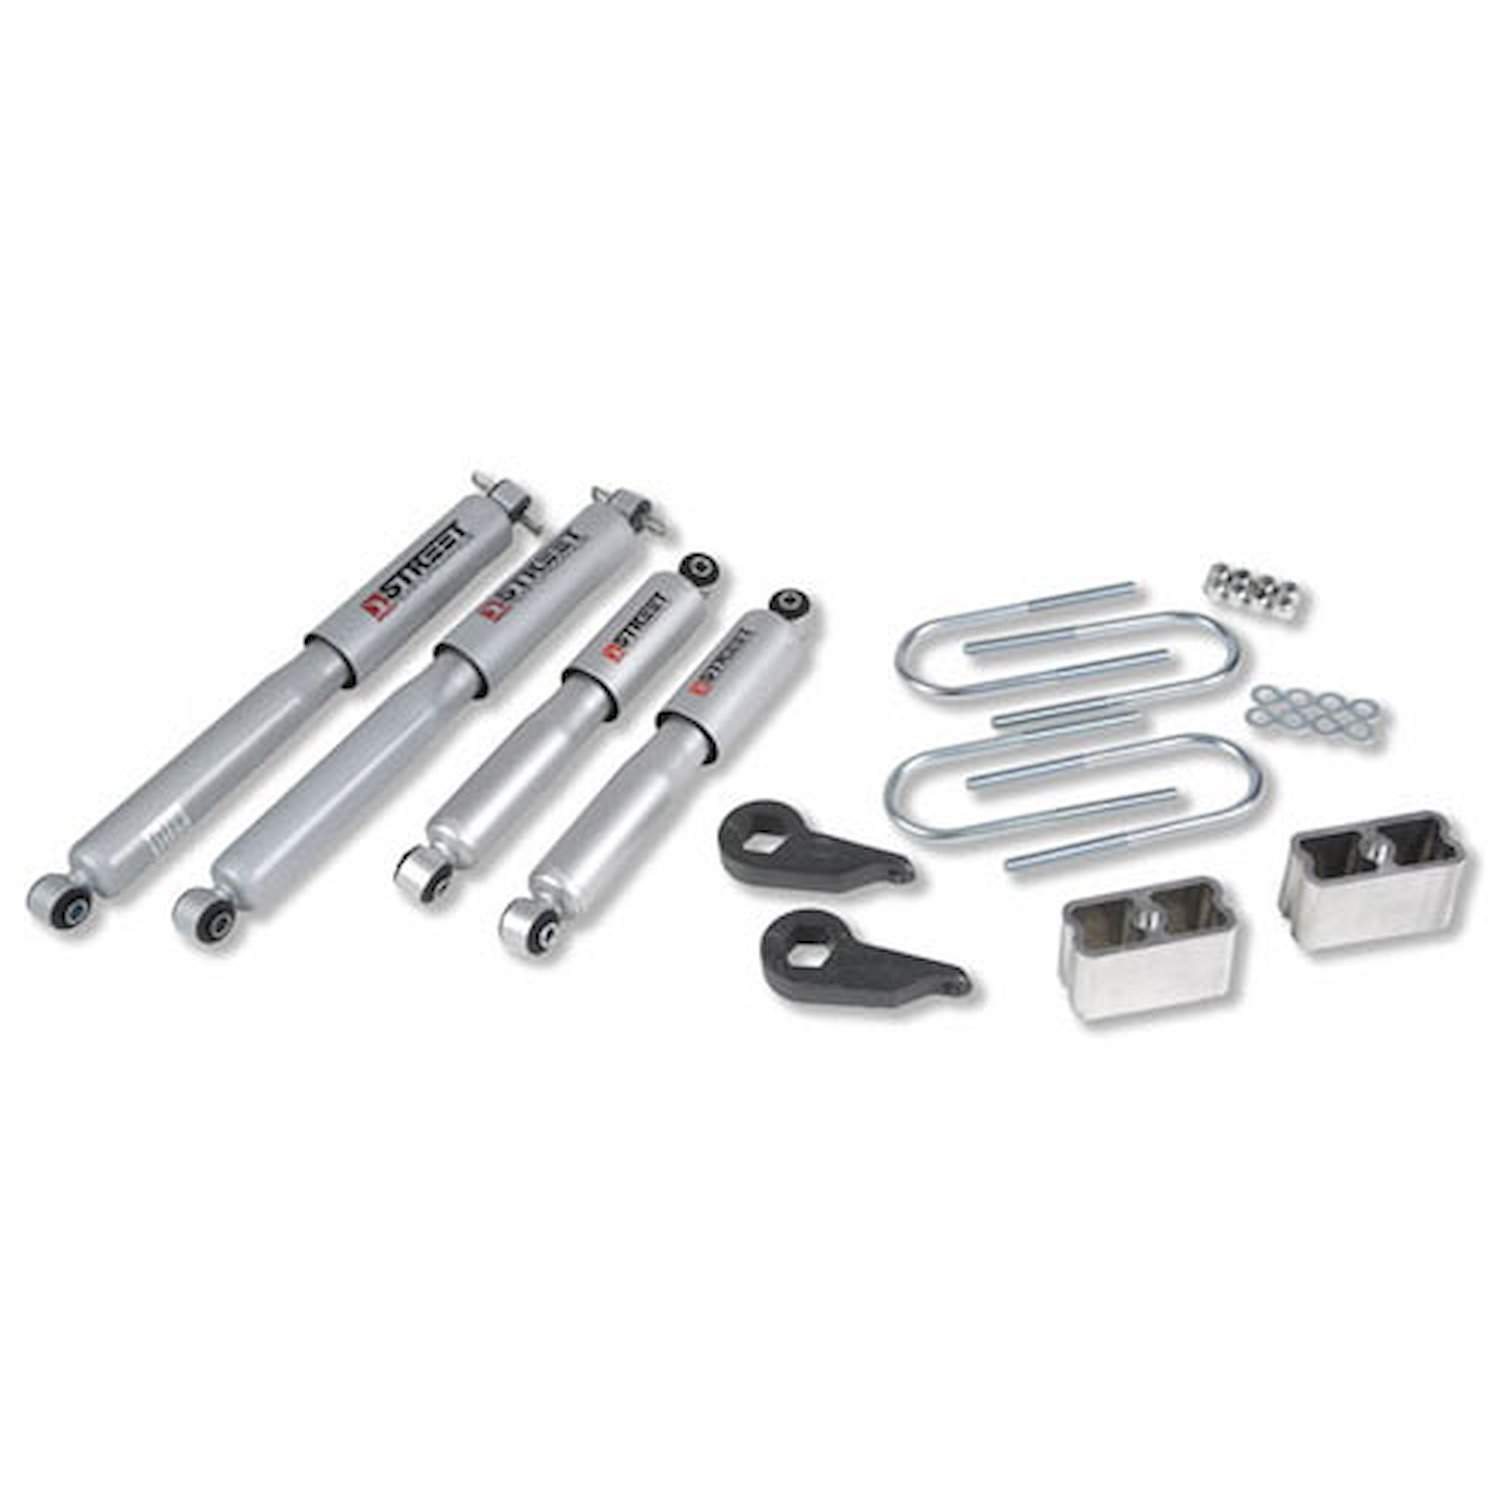 Complete Lowering Kit 1982-1997 Chevy S10/GMC S15